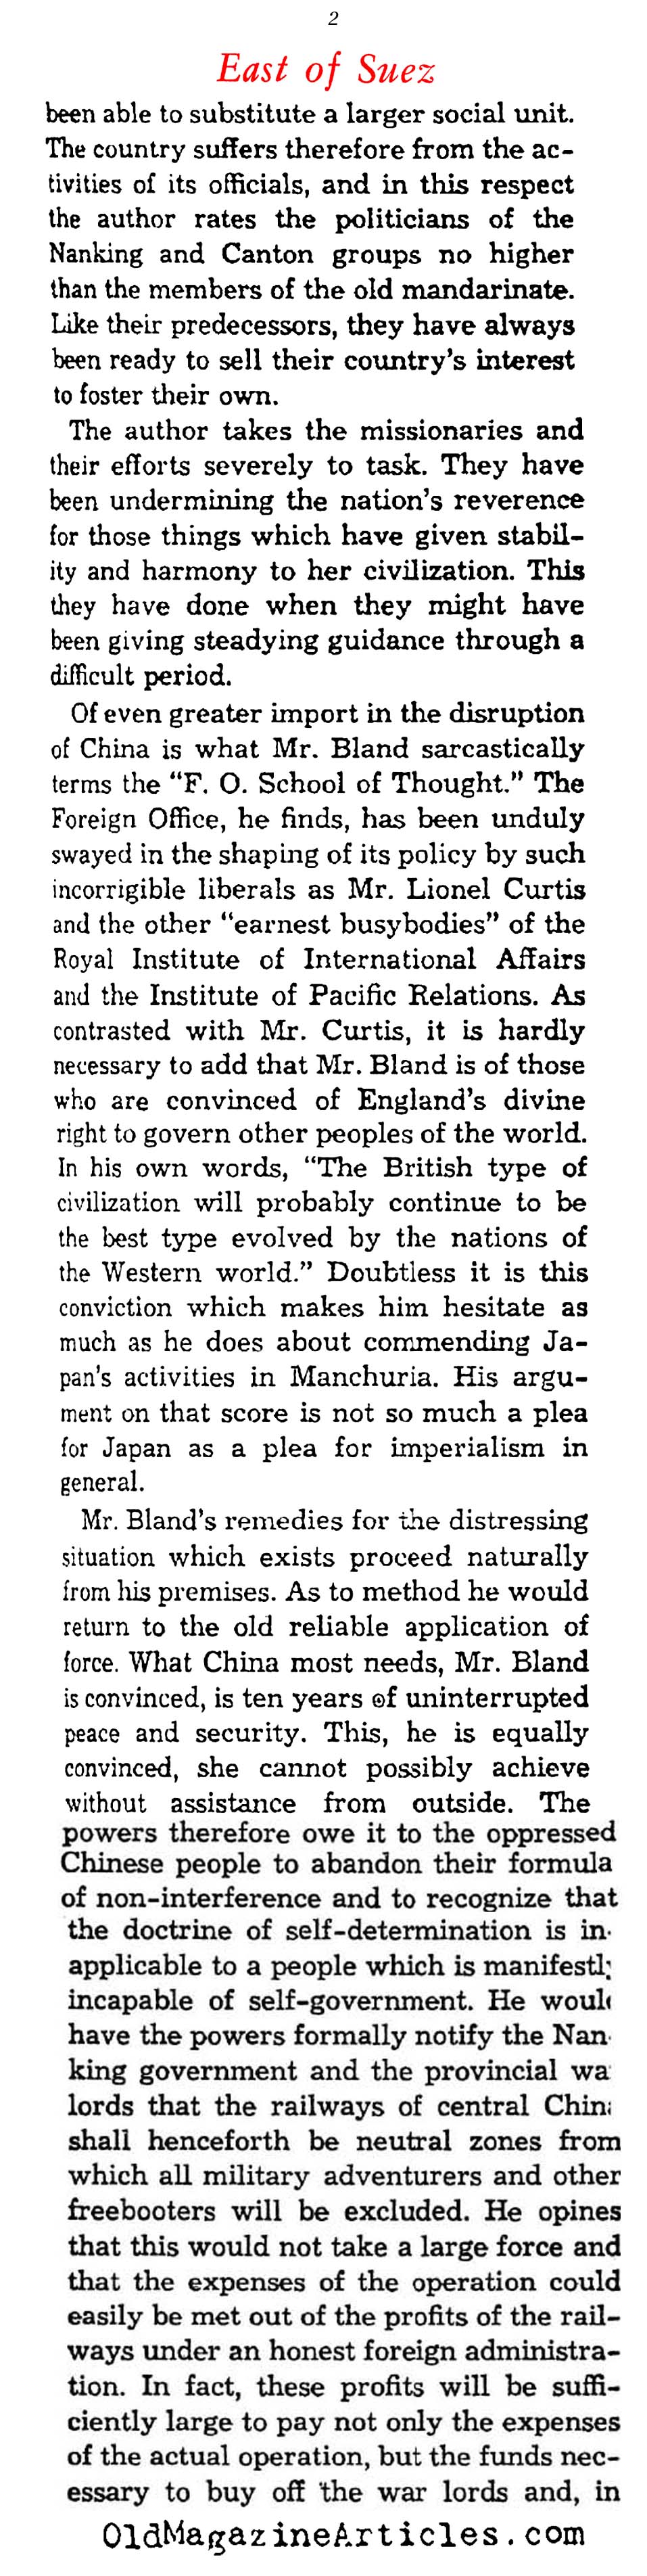 ''China: The Pity of It'' (Saturday Review of Literature, 1933)